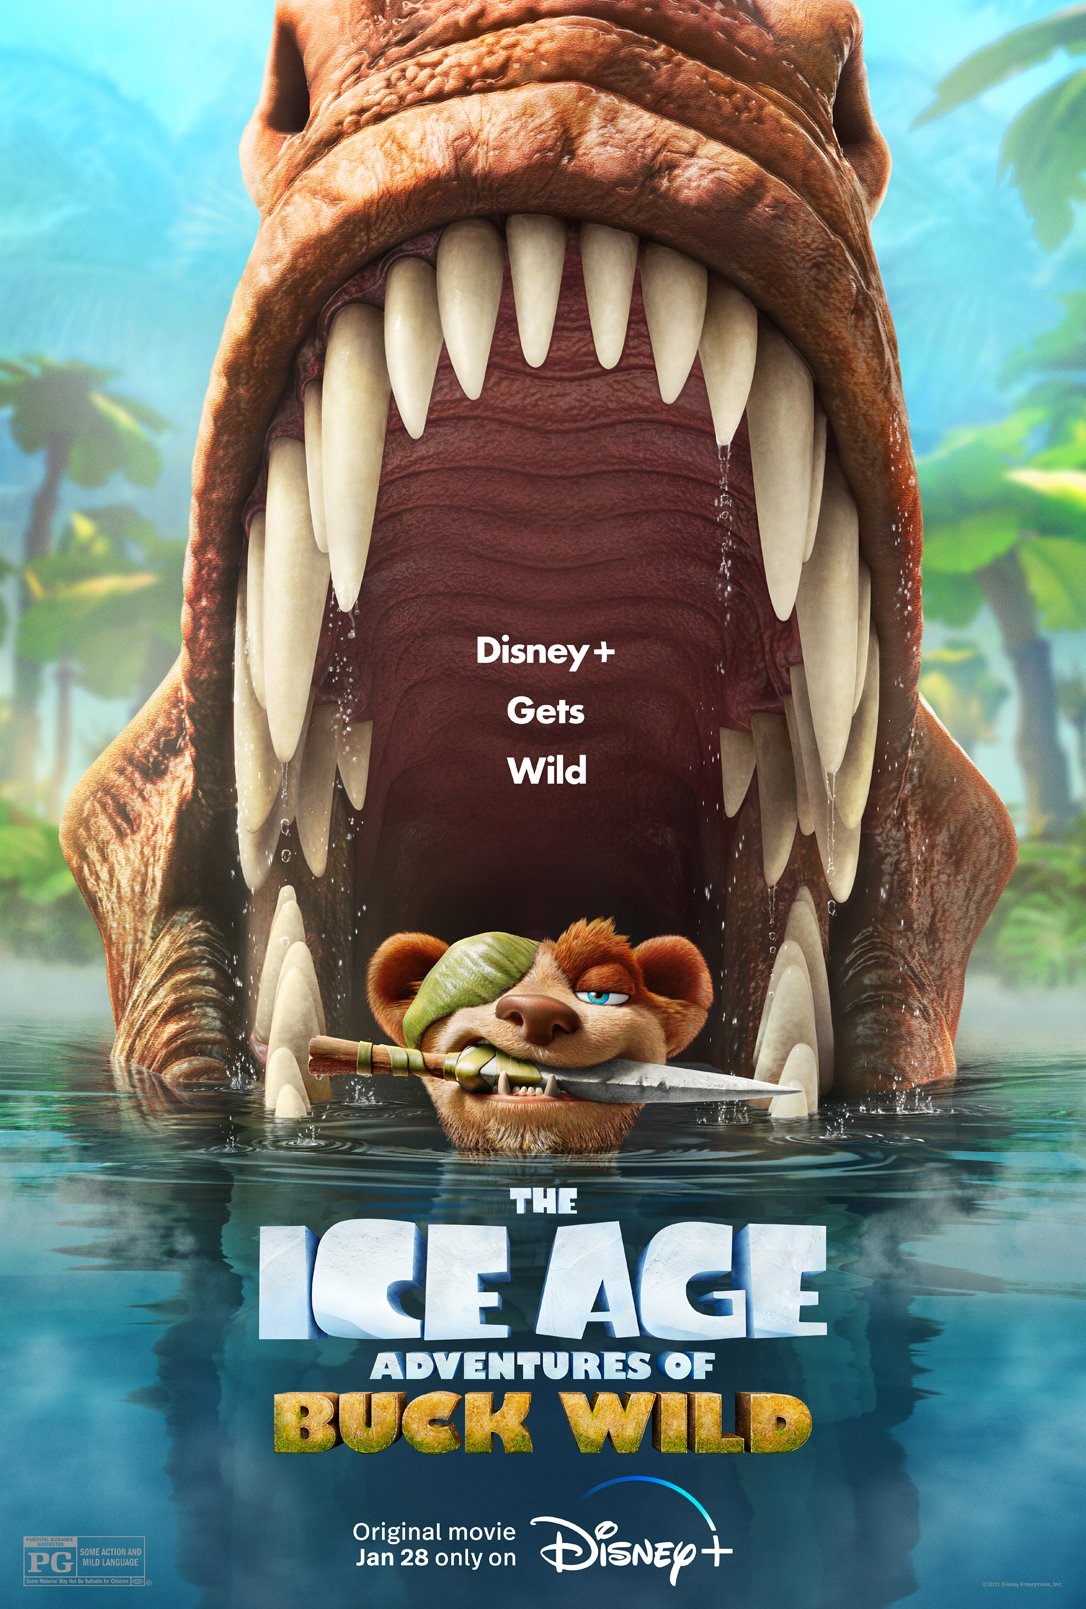 The premise of Buck Wild's Ice Age Adventures is as follows